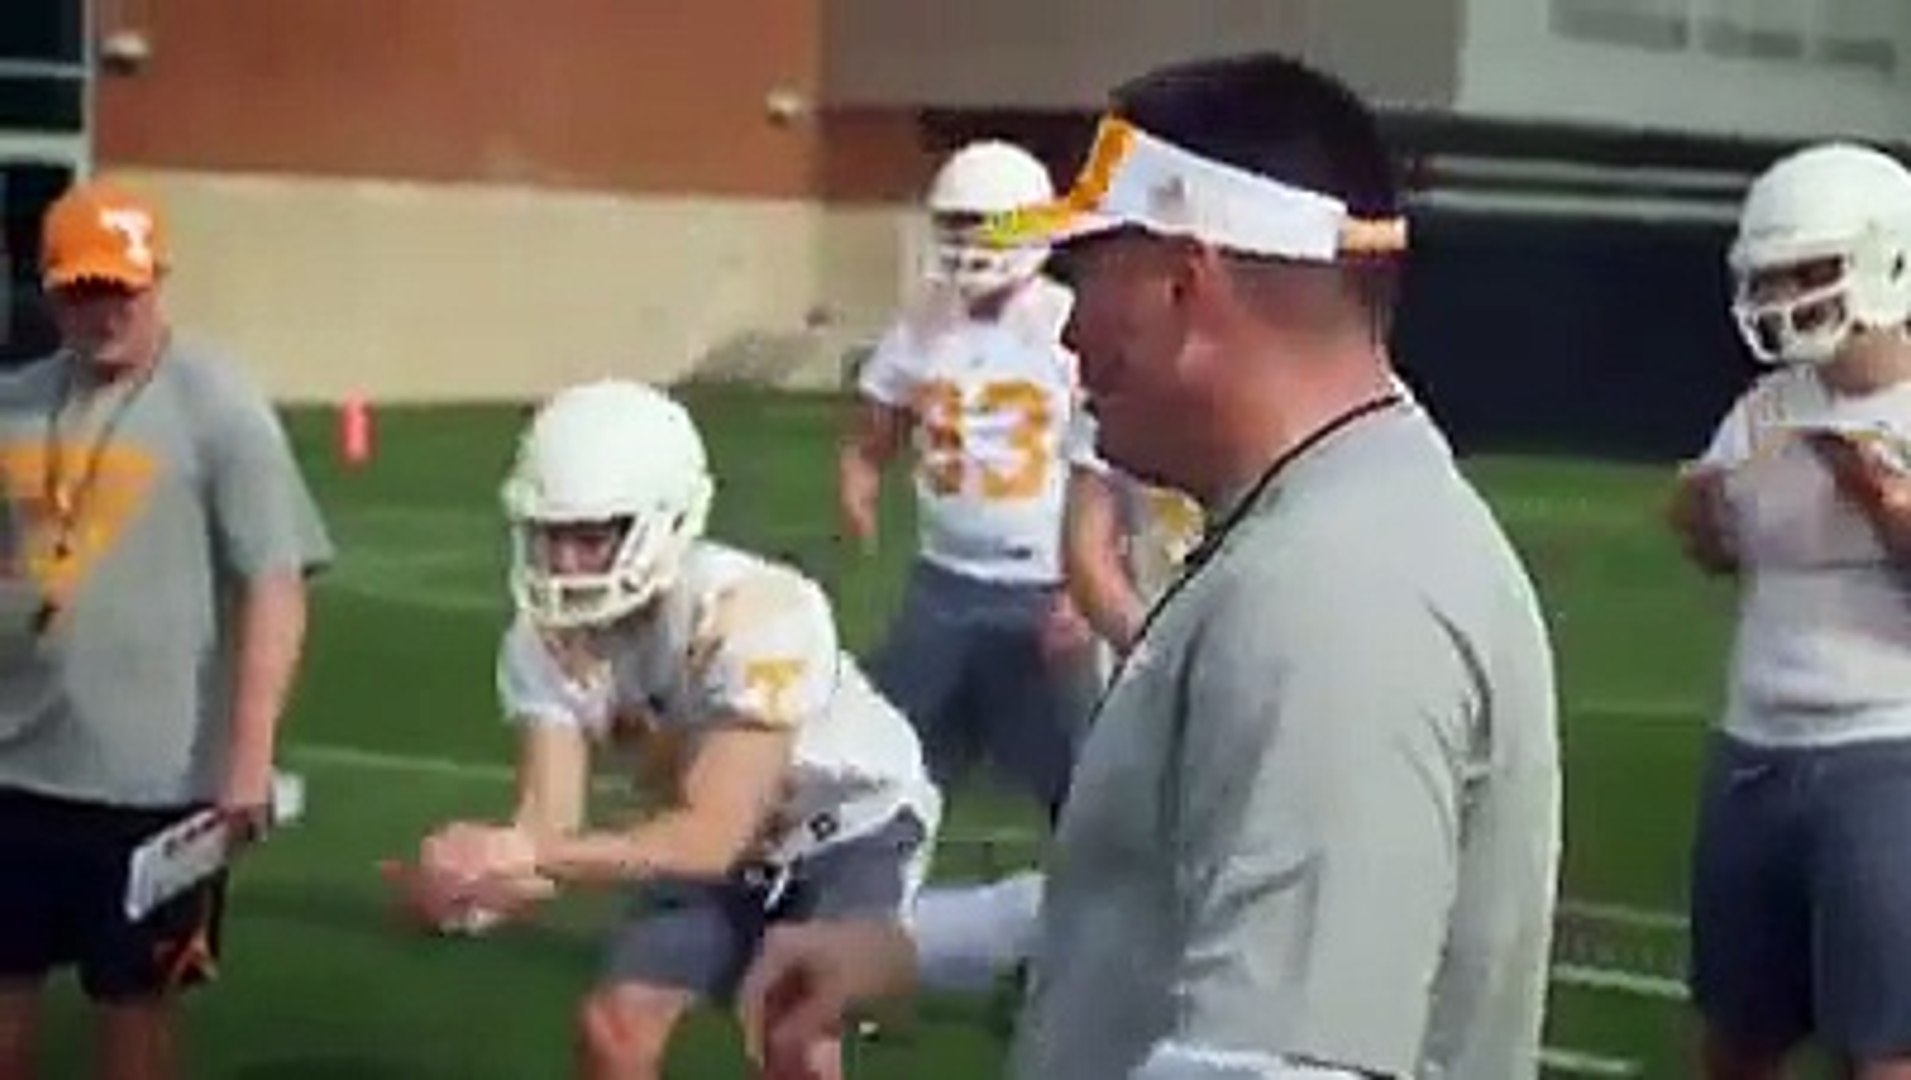 Sweet home Alabama played at Tennessee football practice